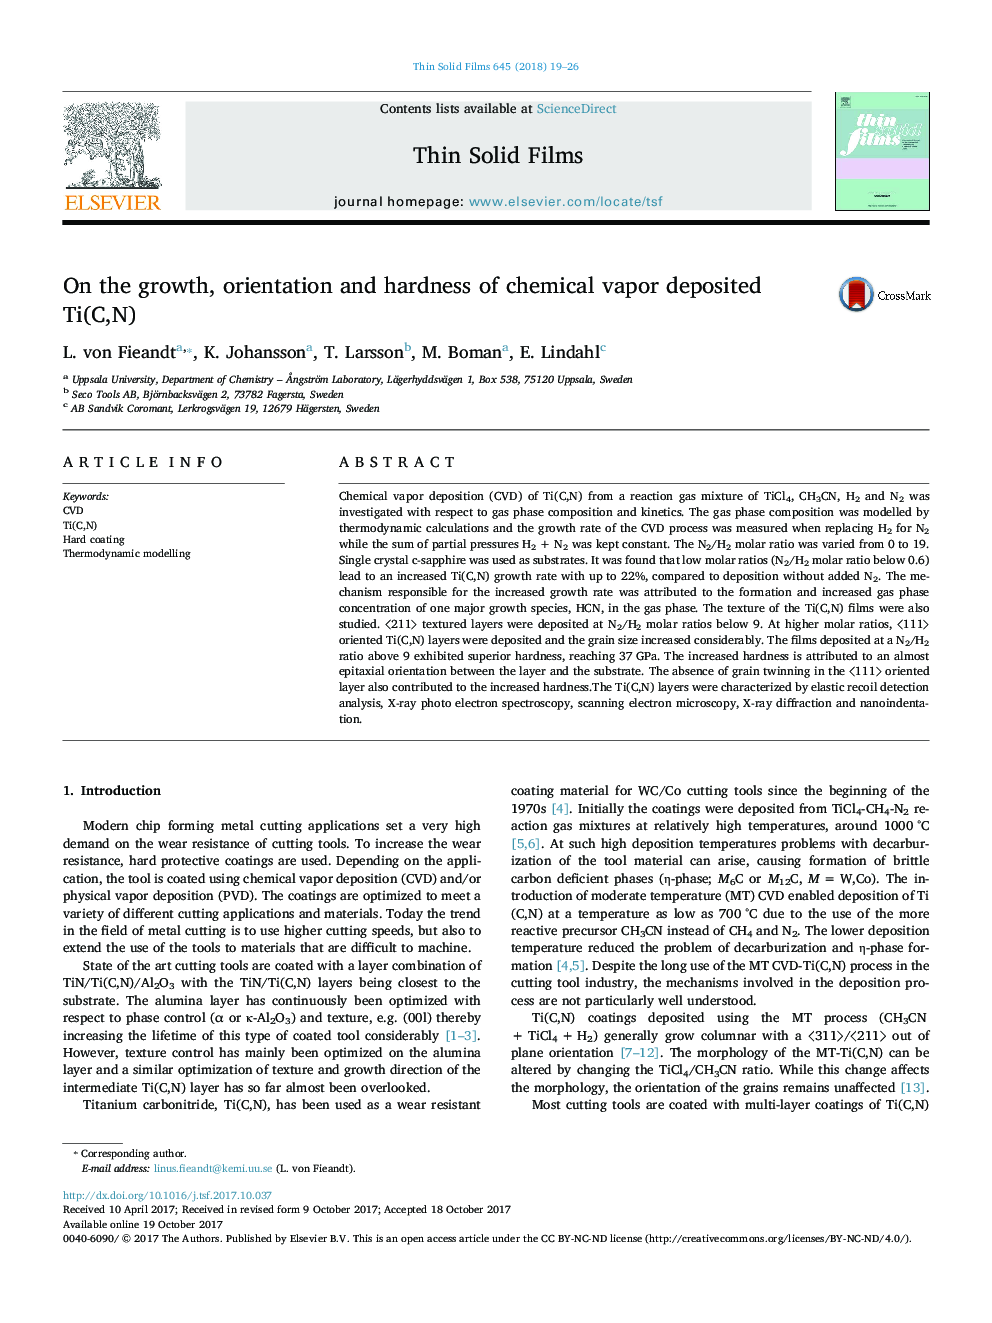 On the growth, orientation and hardness of chemical vapor deposited Ti(C,N)